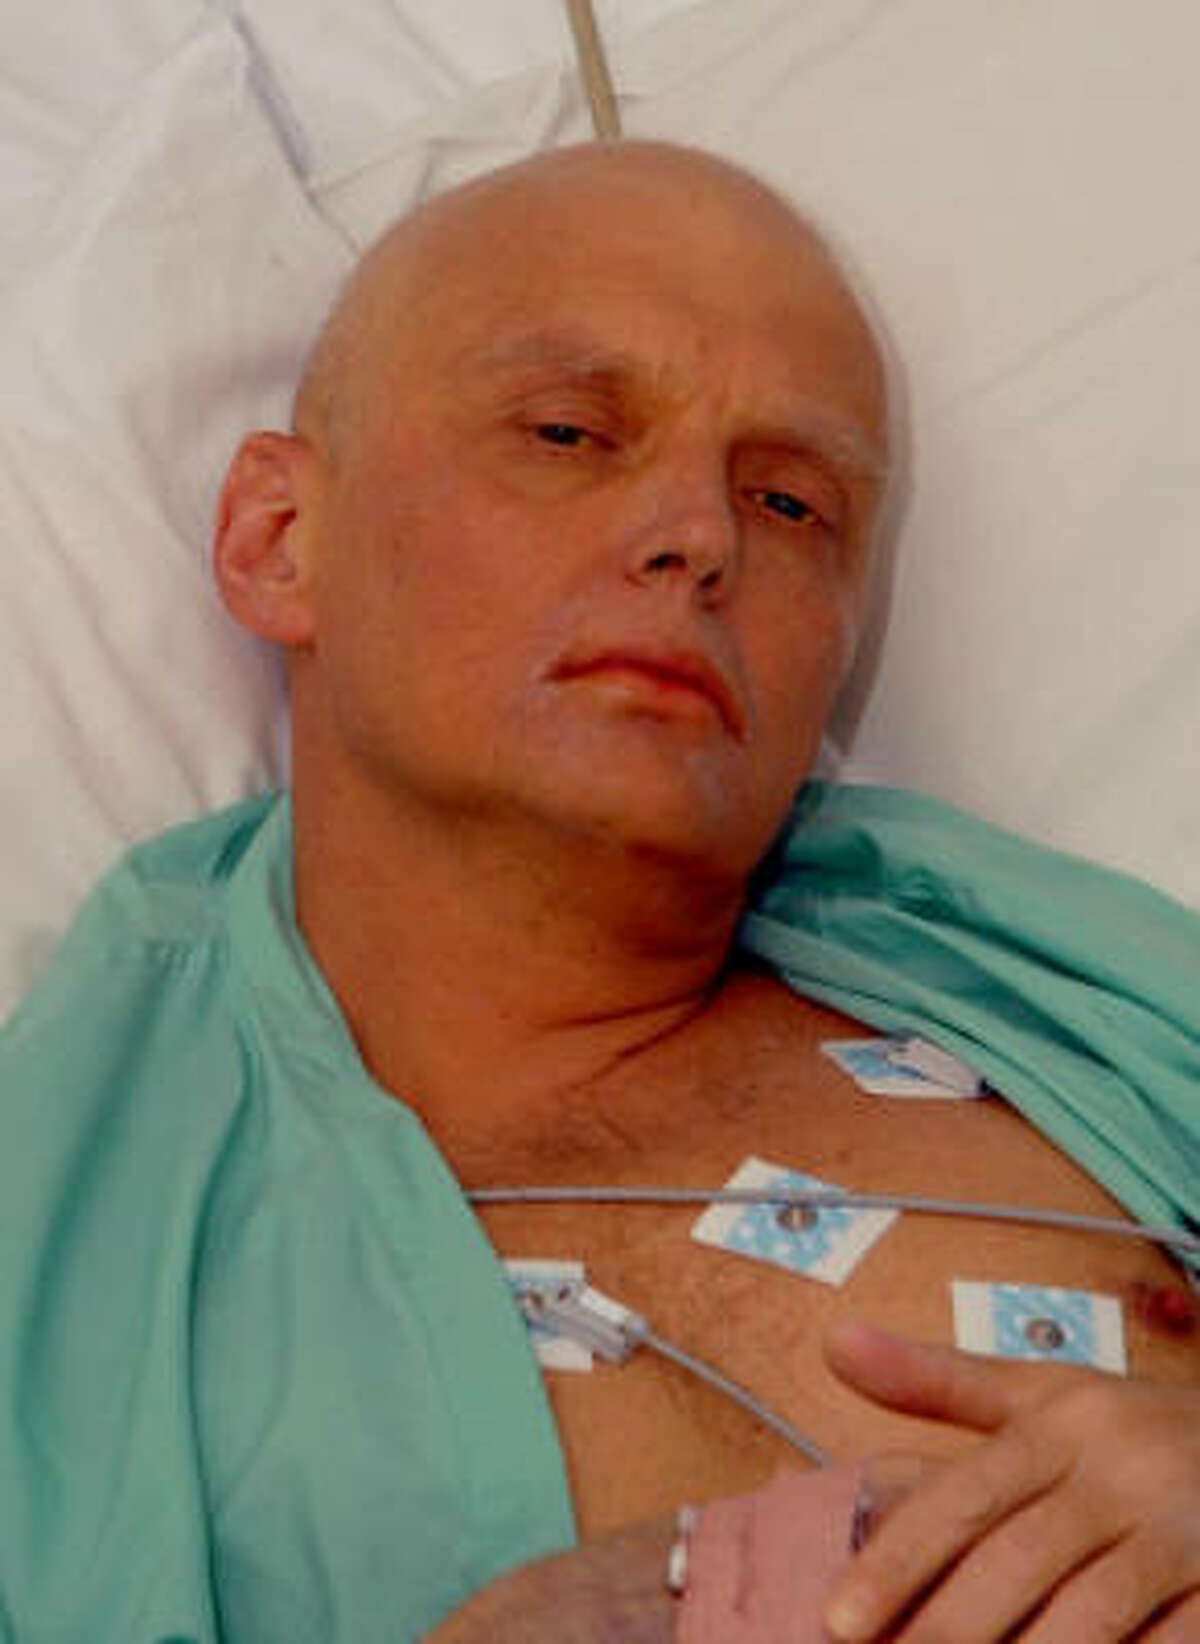 Alexander Litvinenko, 43, a critic of the Russian government, fought for his life in recent days at a London hospital after an apparent poisoning.